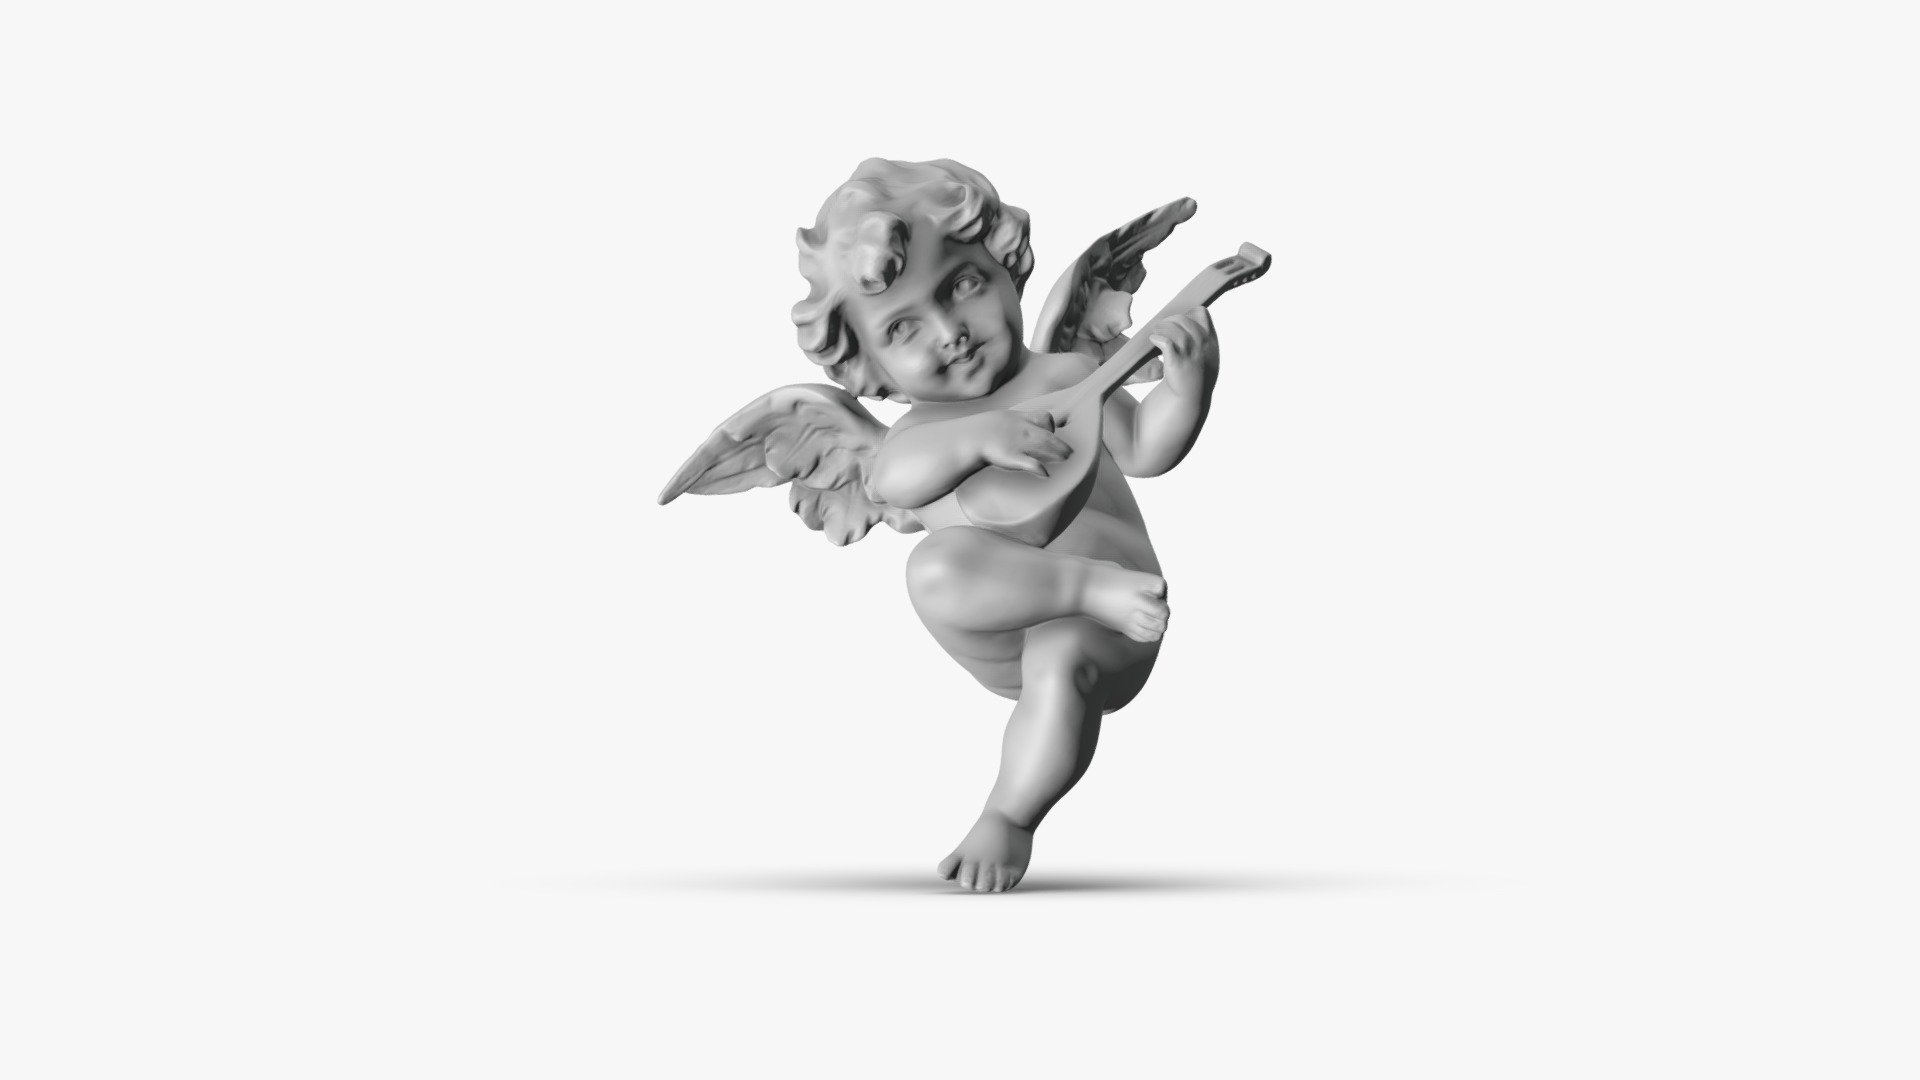 The 3D model depicts a beautiful angel sitting with his leg over his leg, playing on a mondaline. The angel has curly hair, light and airy wings that are spread slightly to the sides, and seems ready to take off at any moment. He has a smile on his face and enjoys the music he plays on his instrument.

The model is perfect for any collection or interior decoration, and would make a great gift for fans of angels, music and nature 3d model